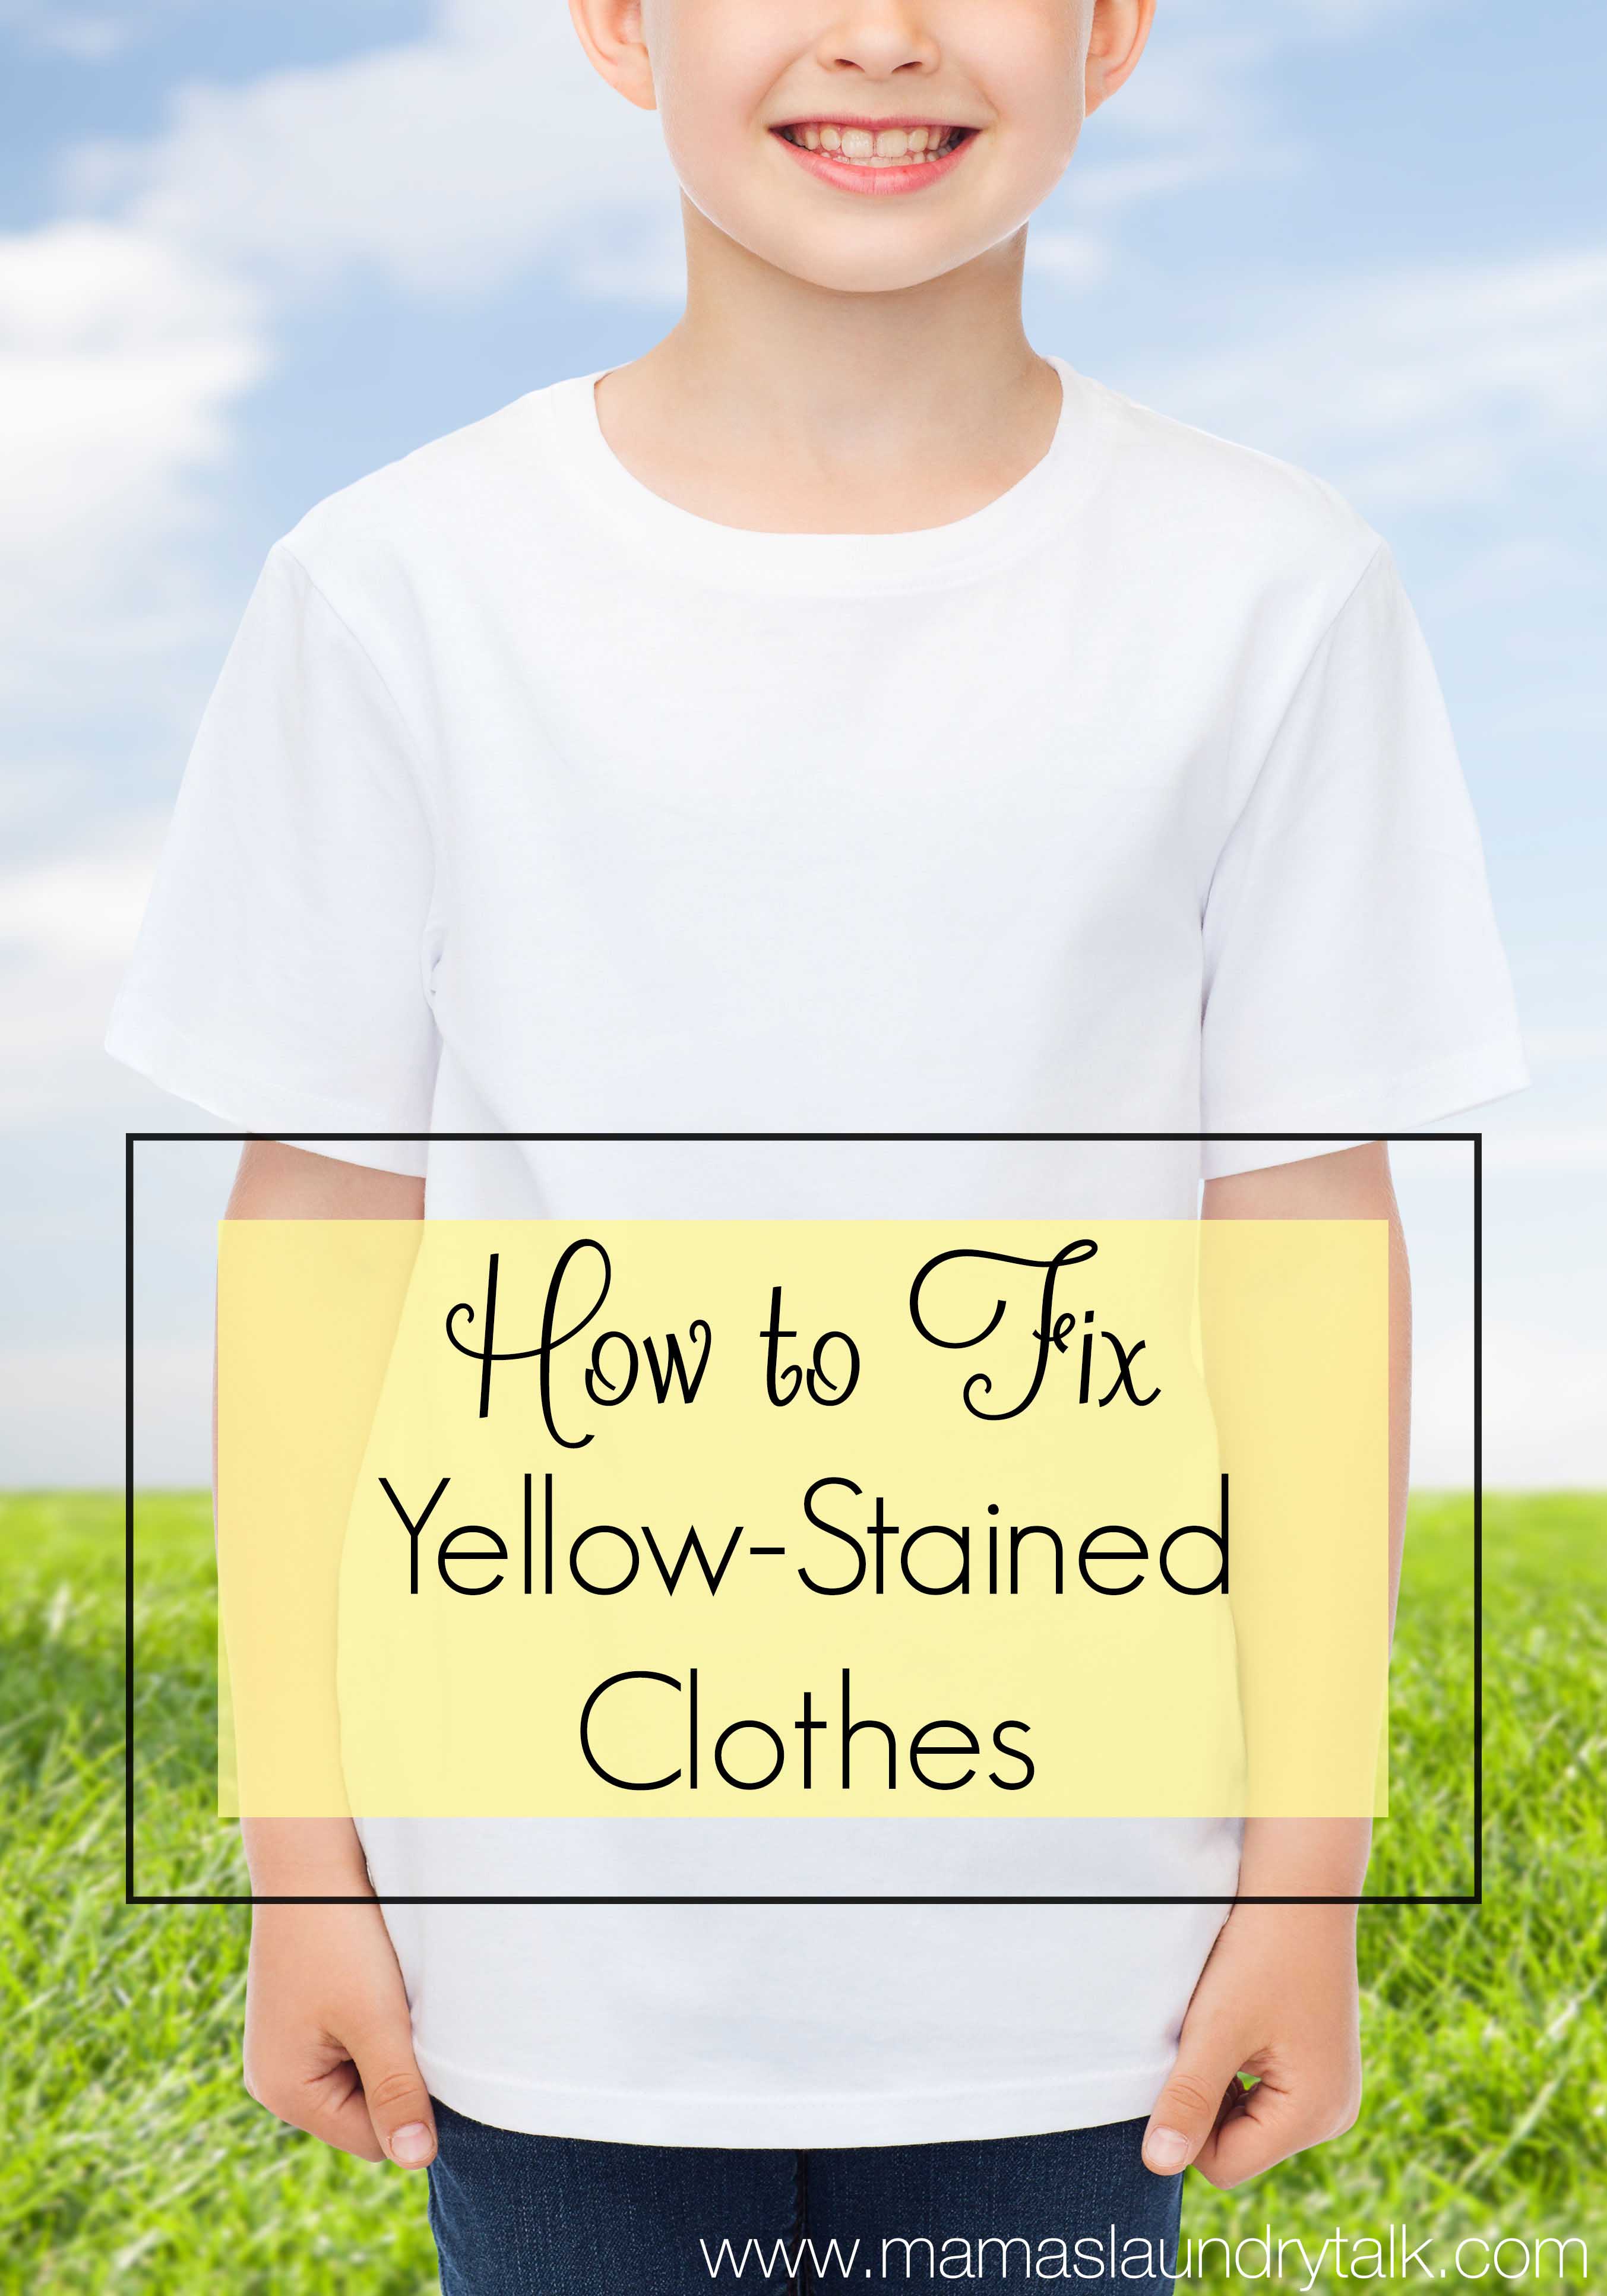 how to get yellow stains out of white